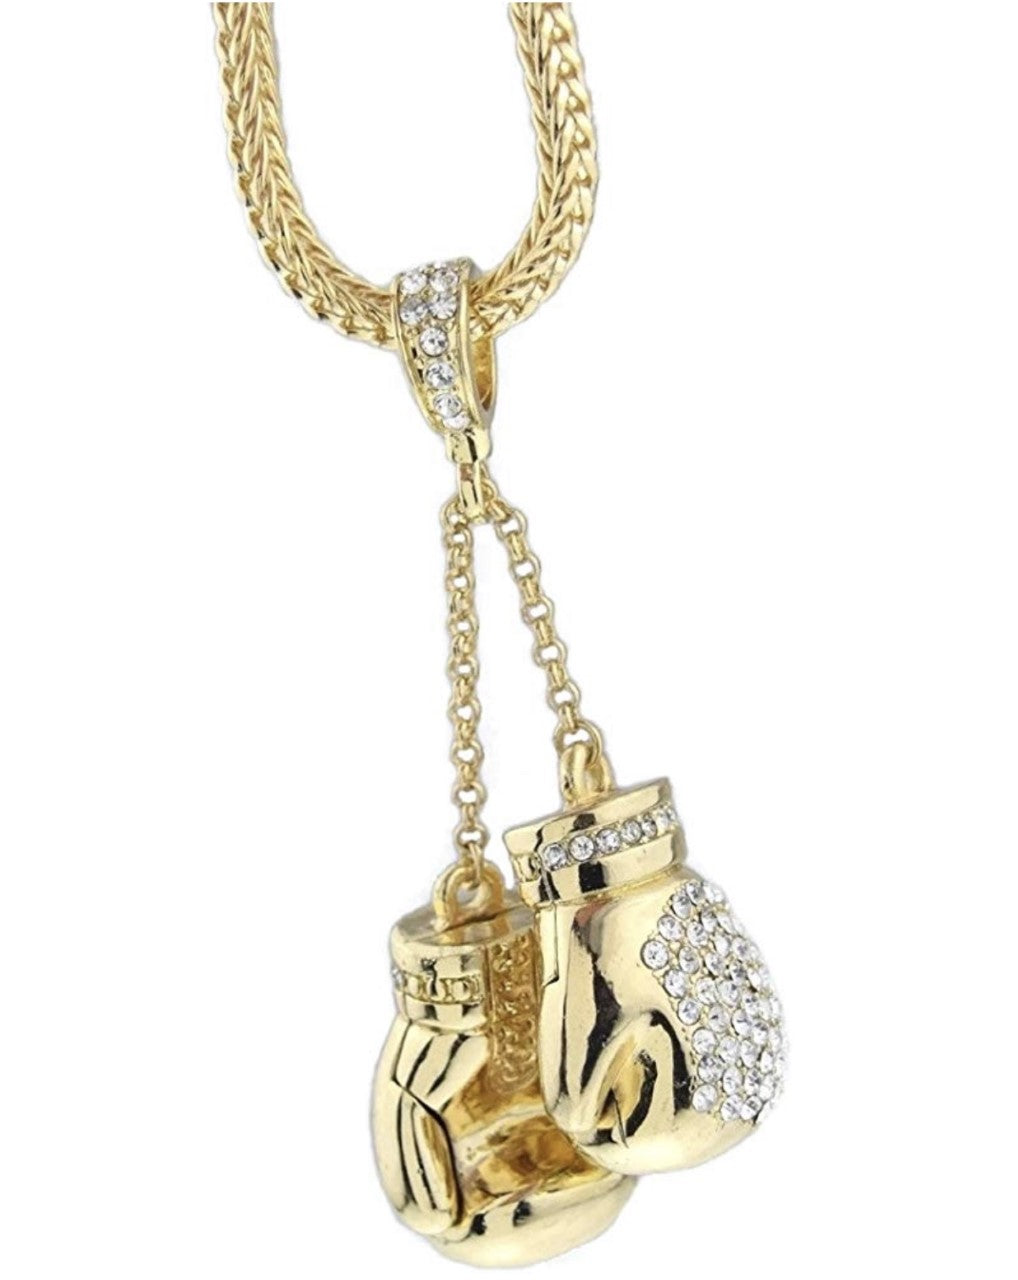 Boxing Gloves Iced Pendant Gold Finish Necklace 36 Inch Long Hip Hop Chain